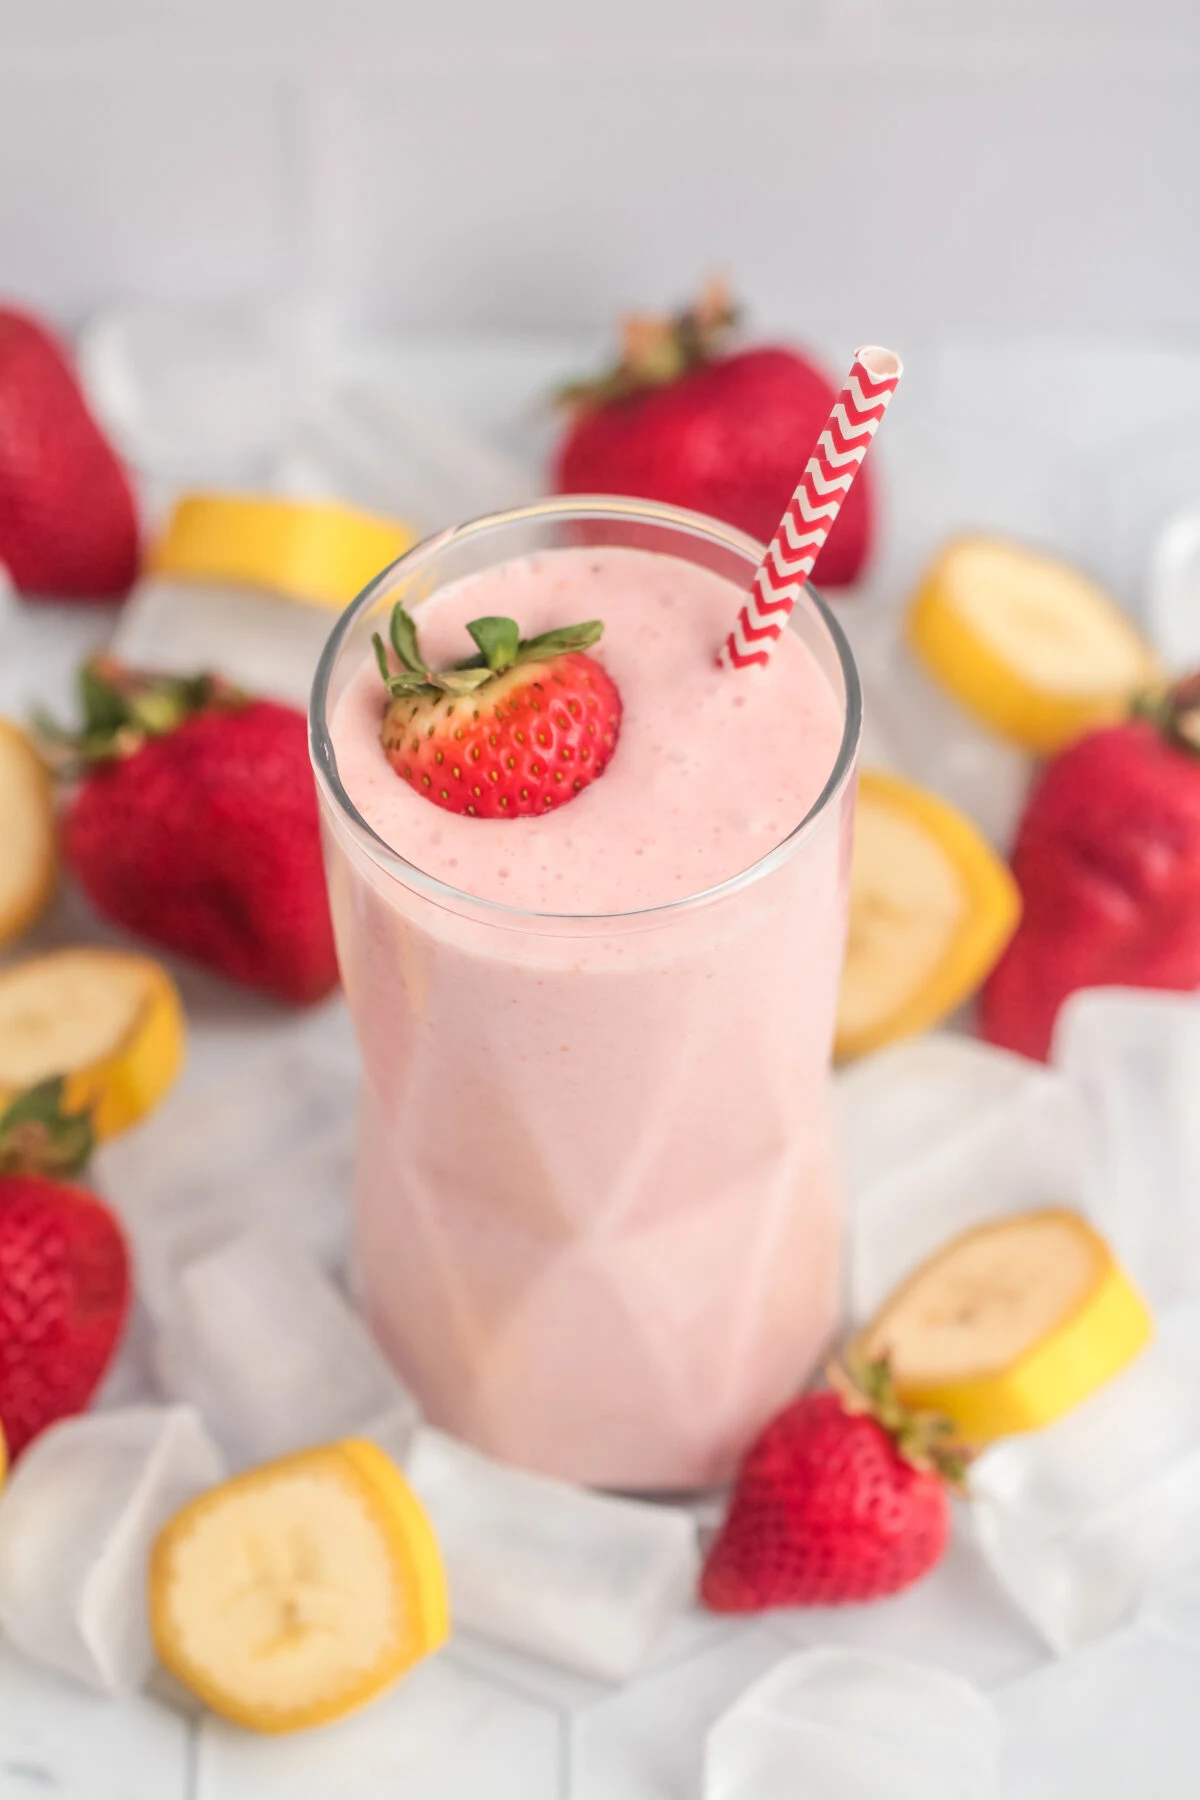 This Strawberry Banana Coconut Smoothie Recipe is perfect for a quick breakfast or snack, it's gluten-free, dairy-free, and vegan.